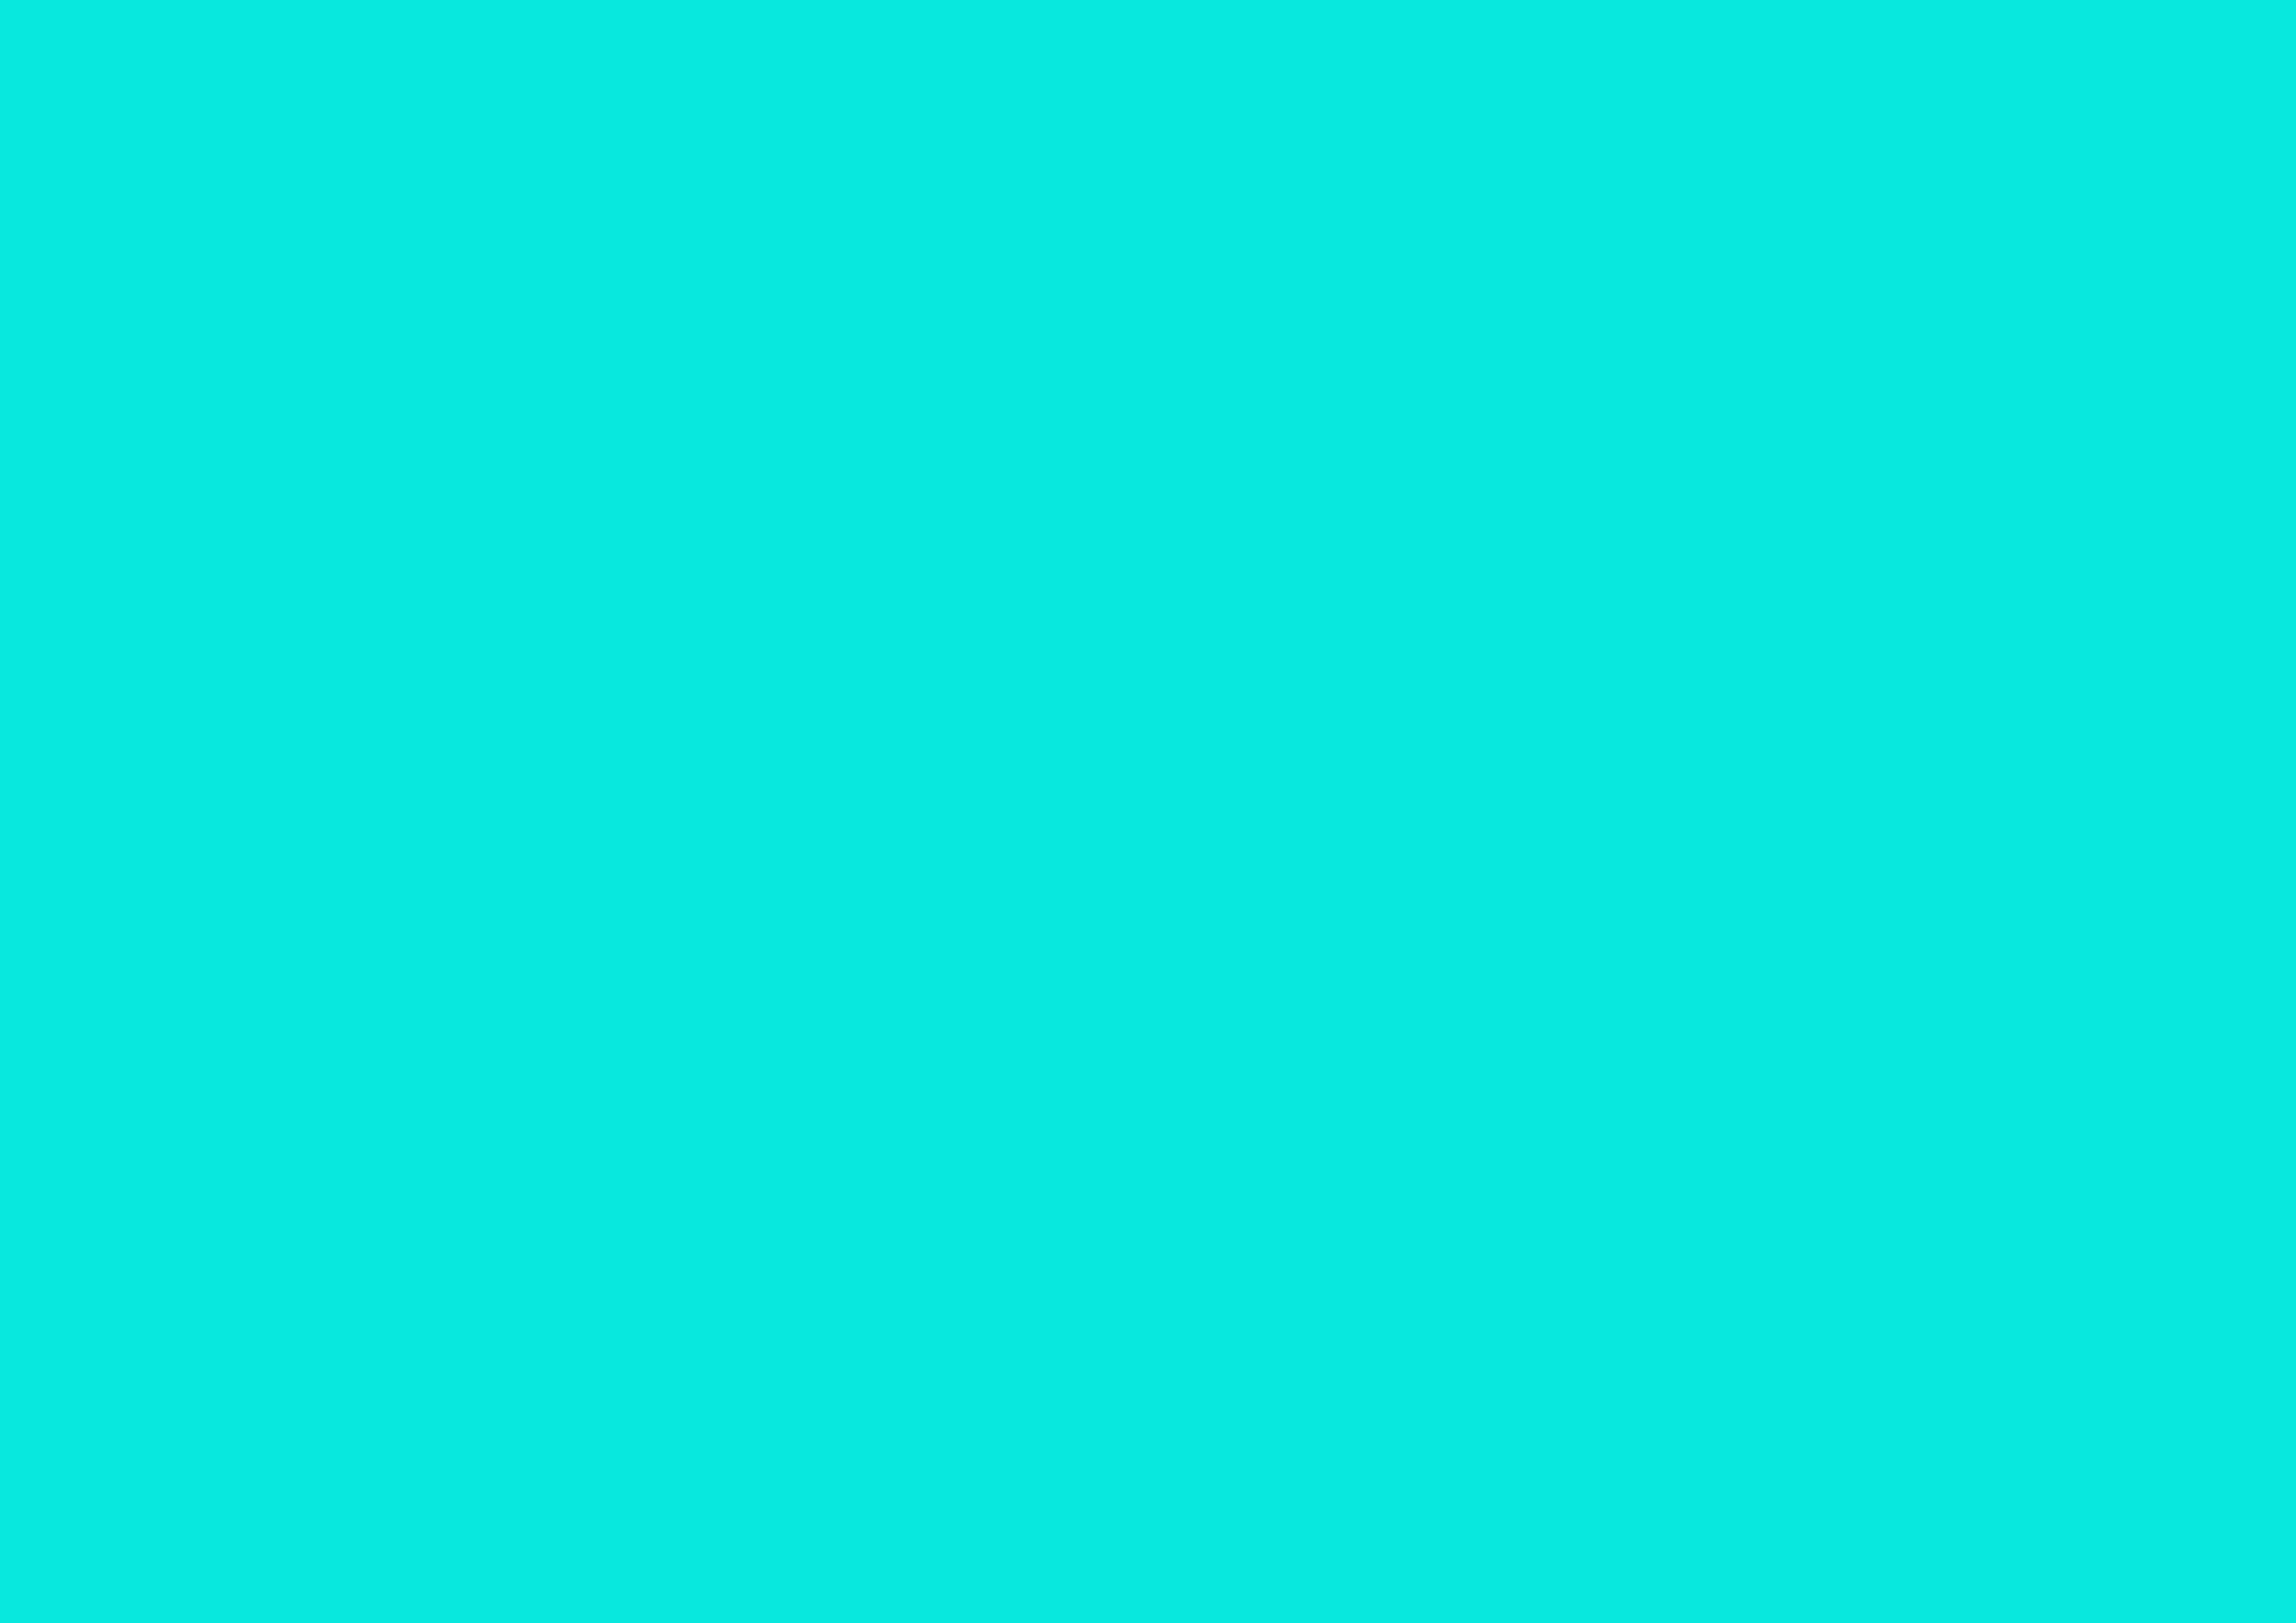 3508x2480 Bright Turquoise Solid Color Background